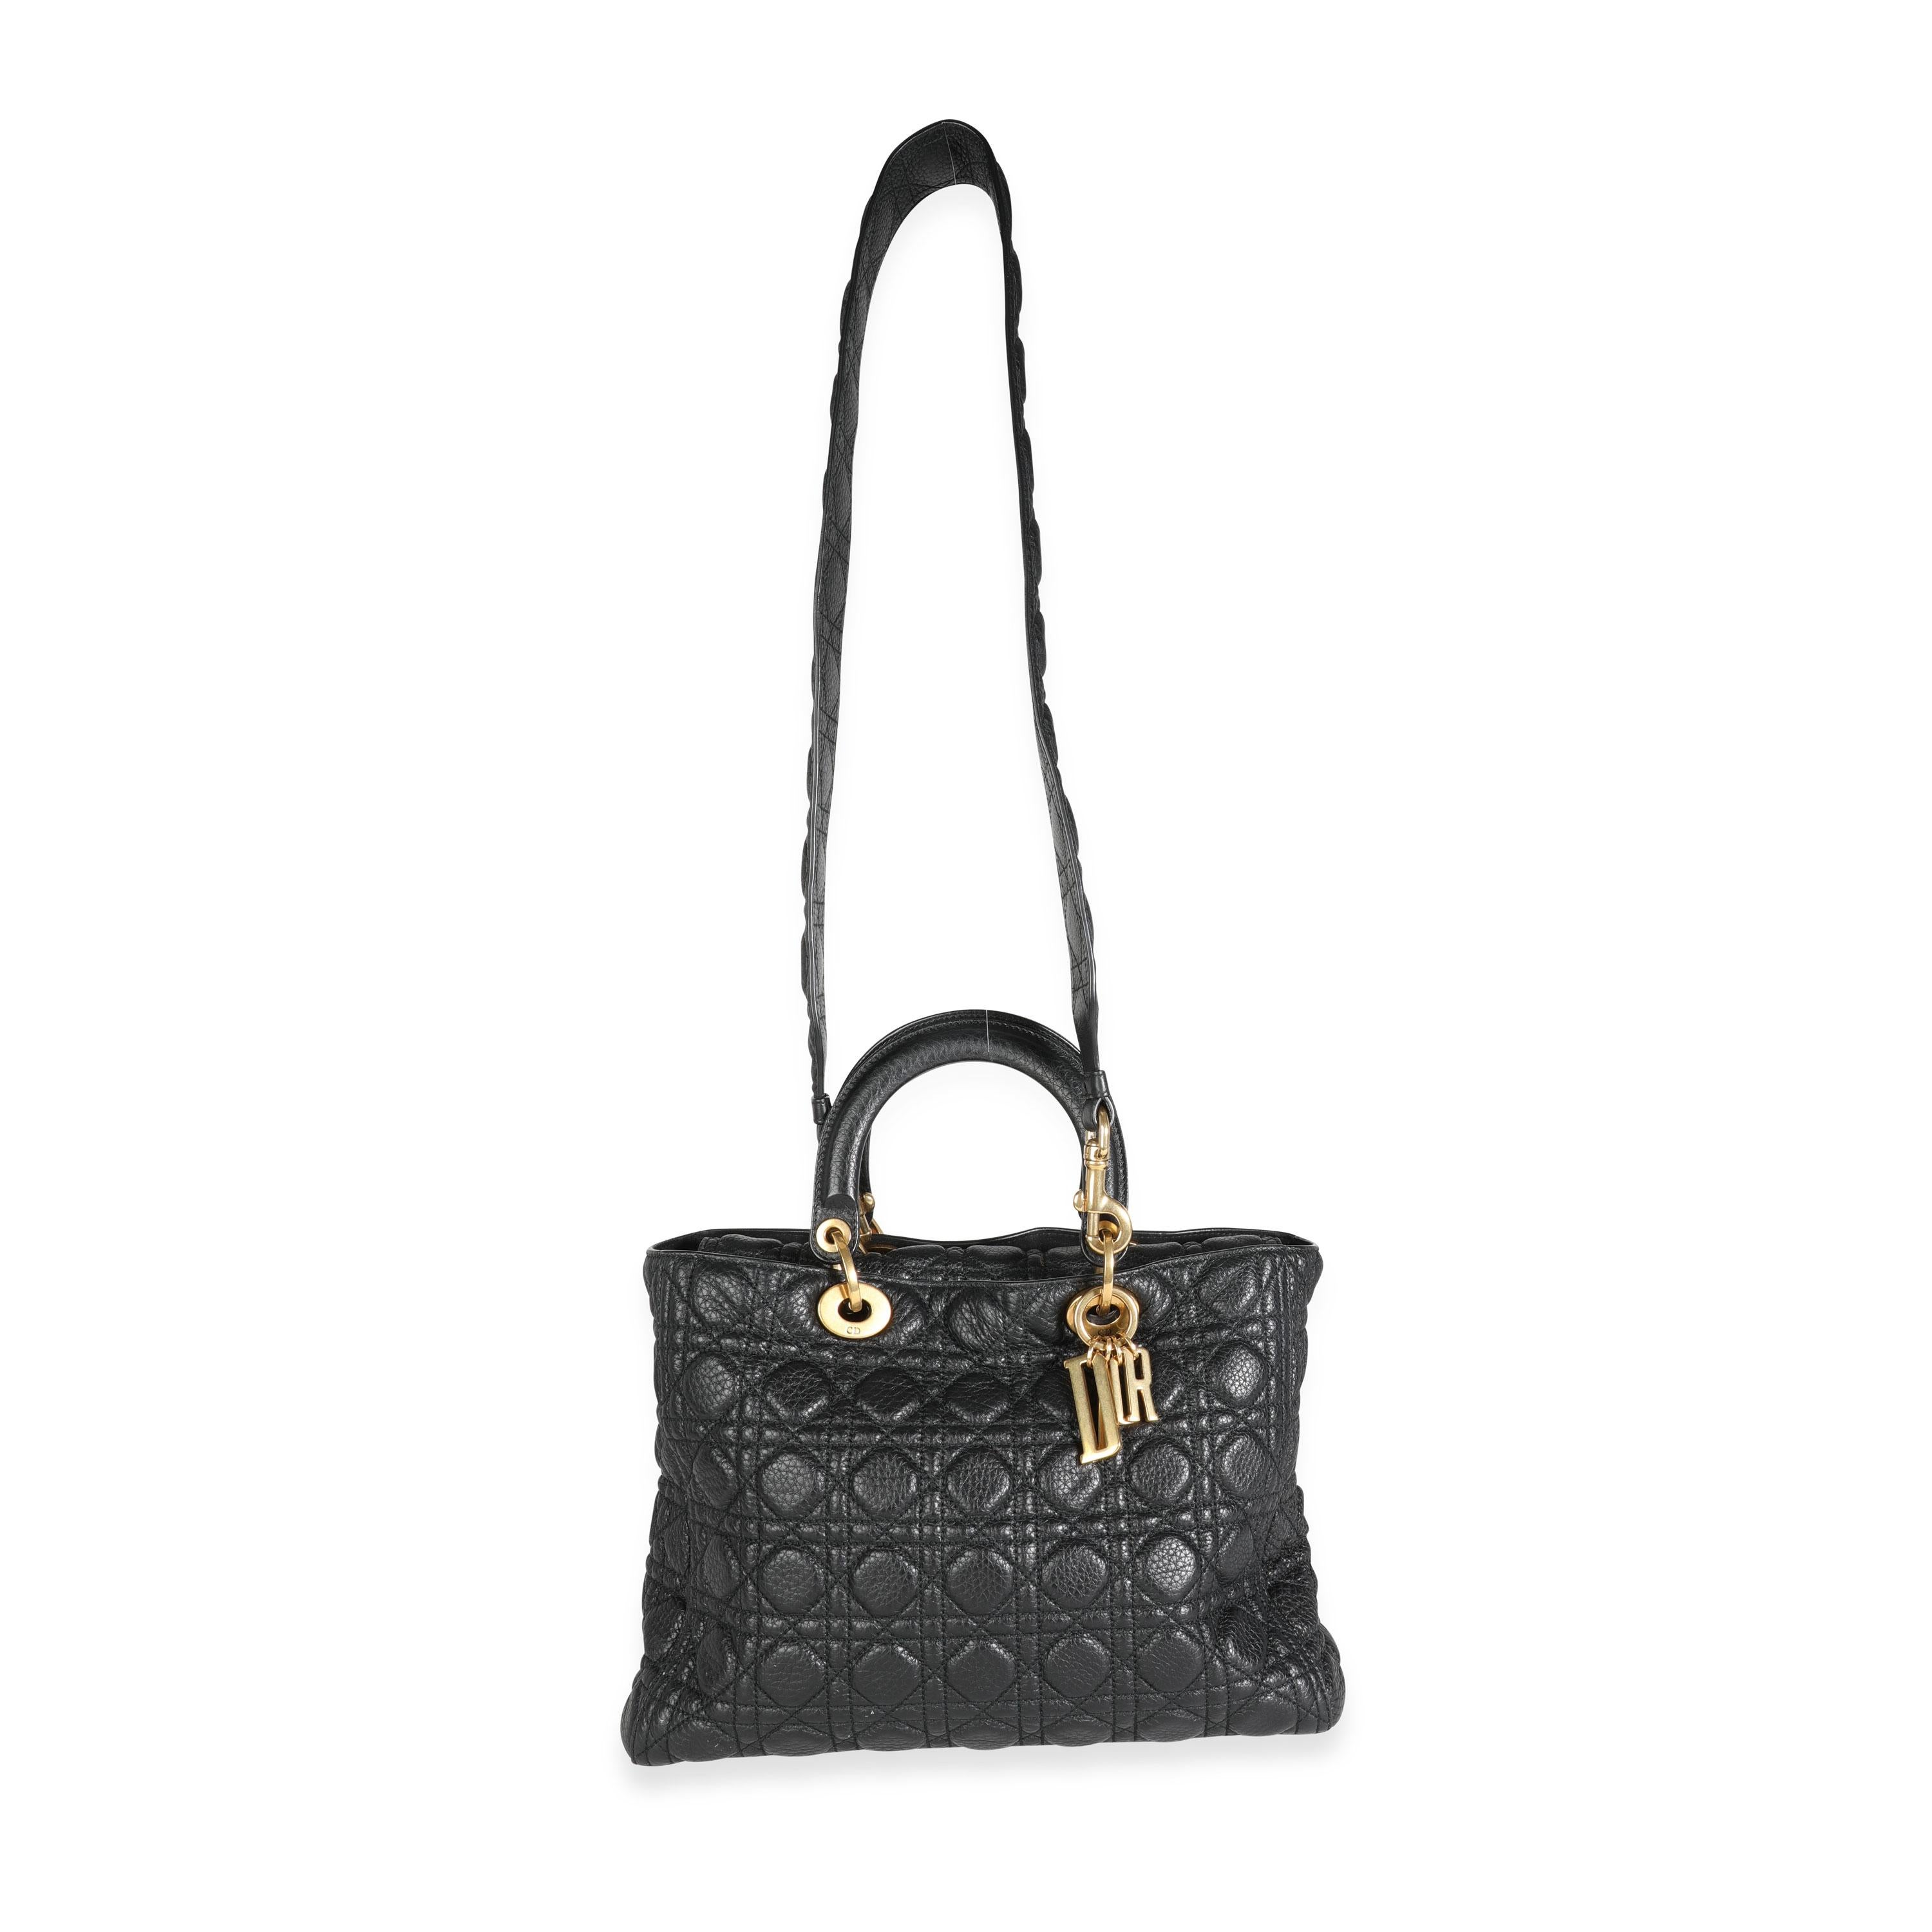 Listing Title: Dior Black Cannage Quilted Grained Calfskin Large Lady Dior Bag
SKU: 114317
MSRP: 5600.00
Condition: Pre-owned (3000)
Condition Description: Renamed in honor of Princess Diana, the Lady Dior remains a staple in Dior Collections.